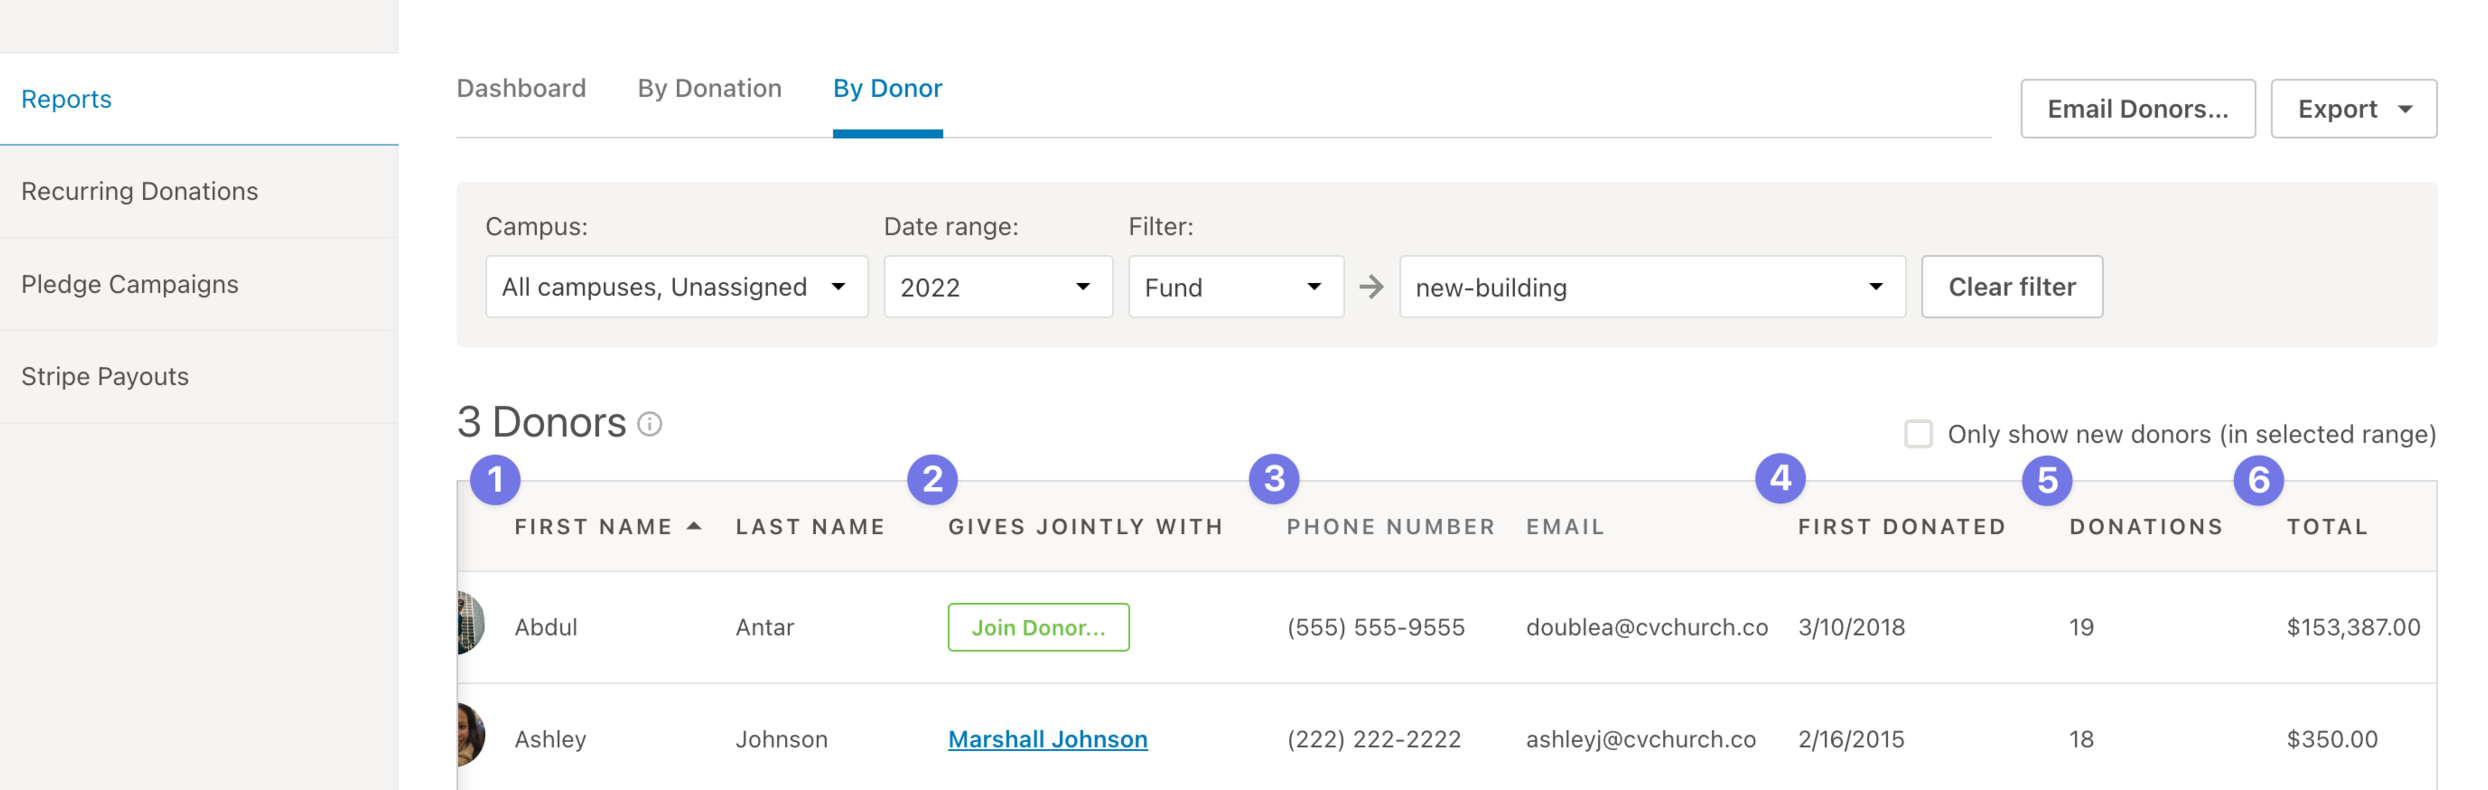 Donor_Table_with_Numbers.png